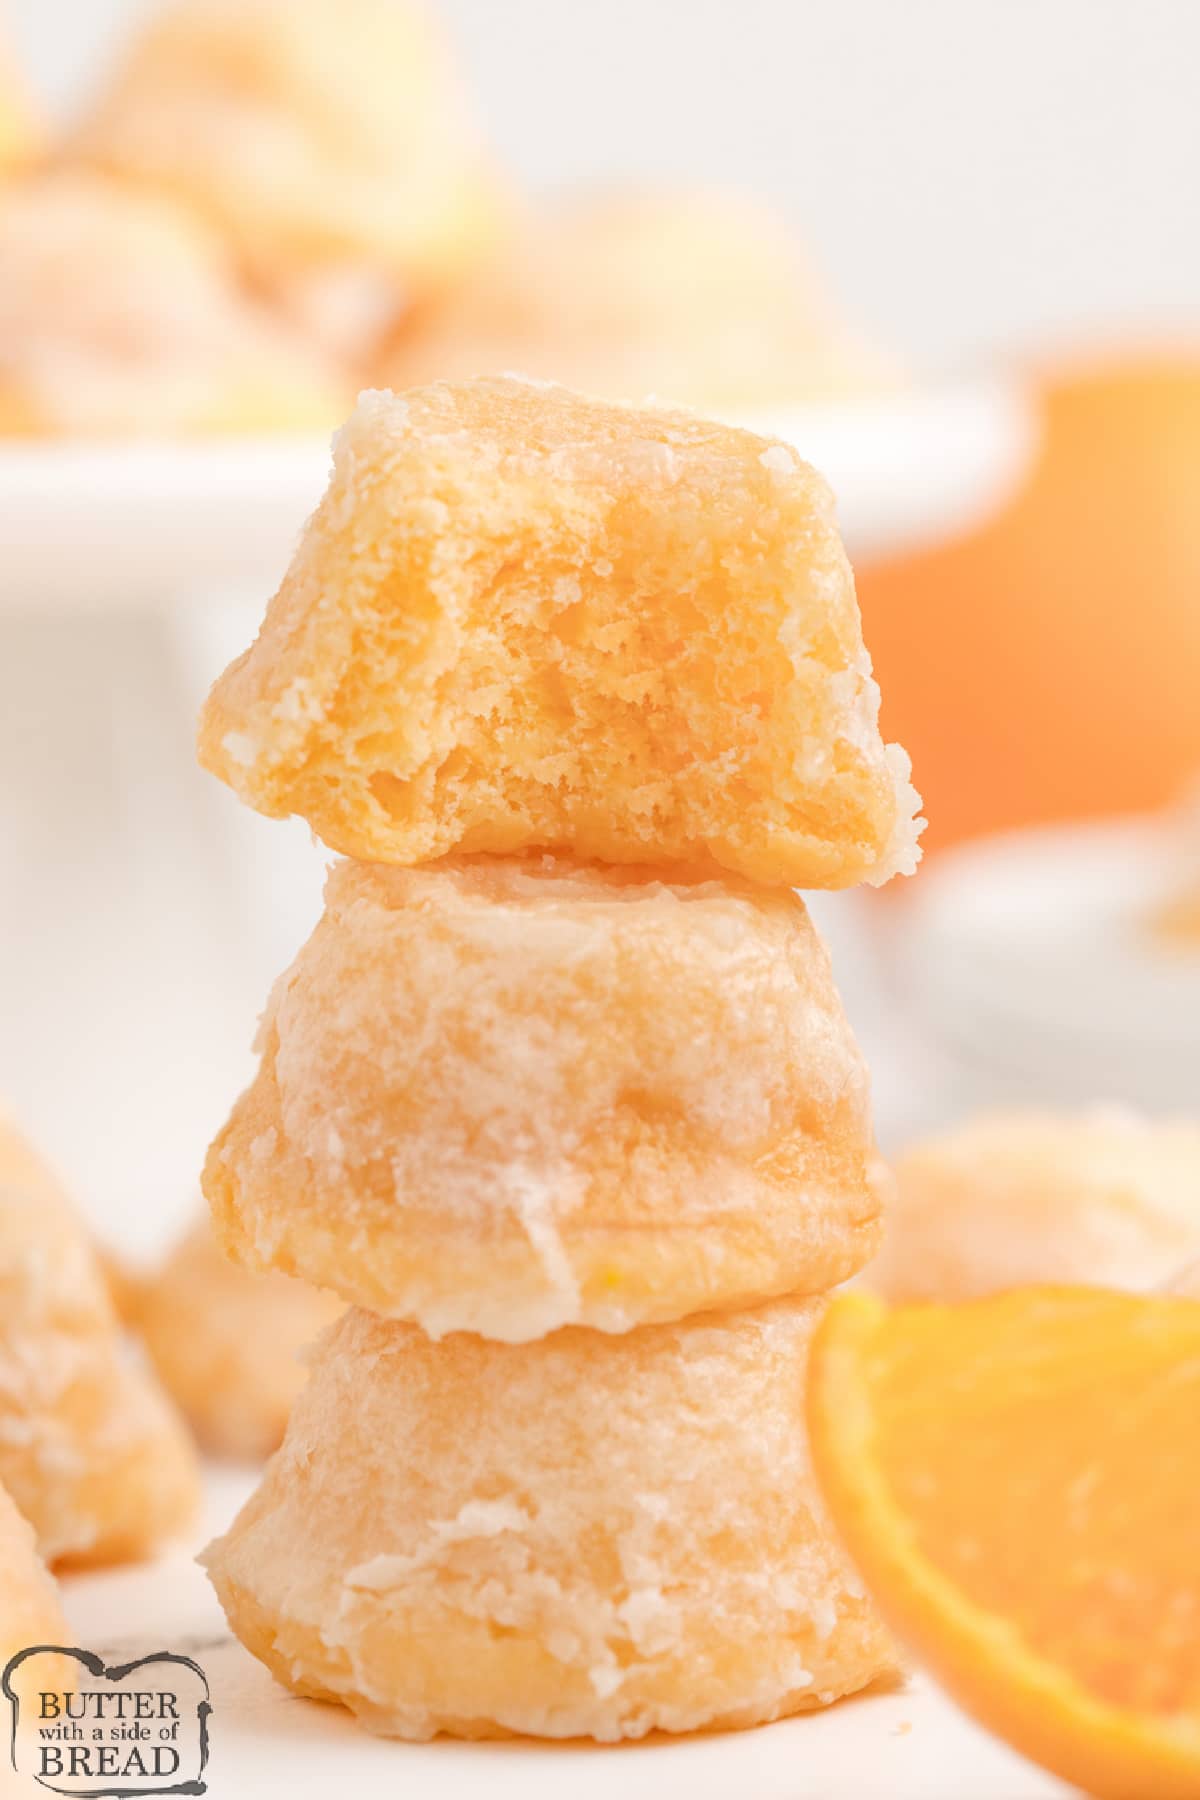 Orange Creamsicle Cake Bites are delicious bite-sized treats that start with a cake mix! The easy orange glaze soaks into the bottoms, making these little cupcakes even more incredible.